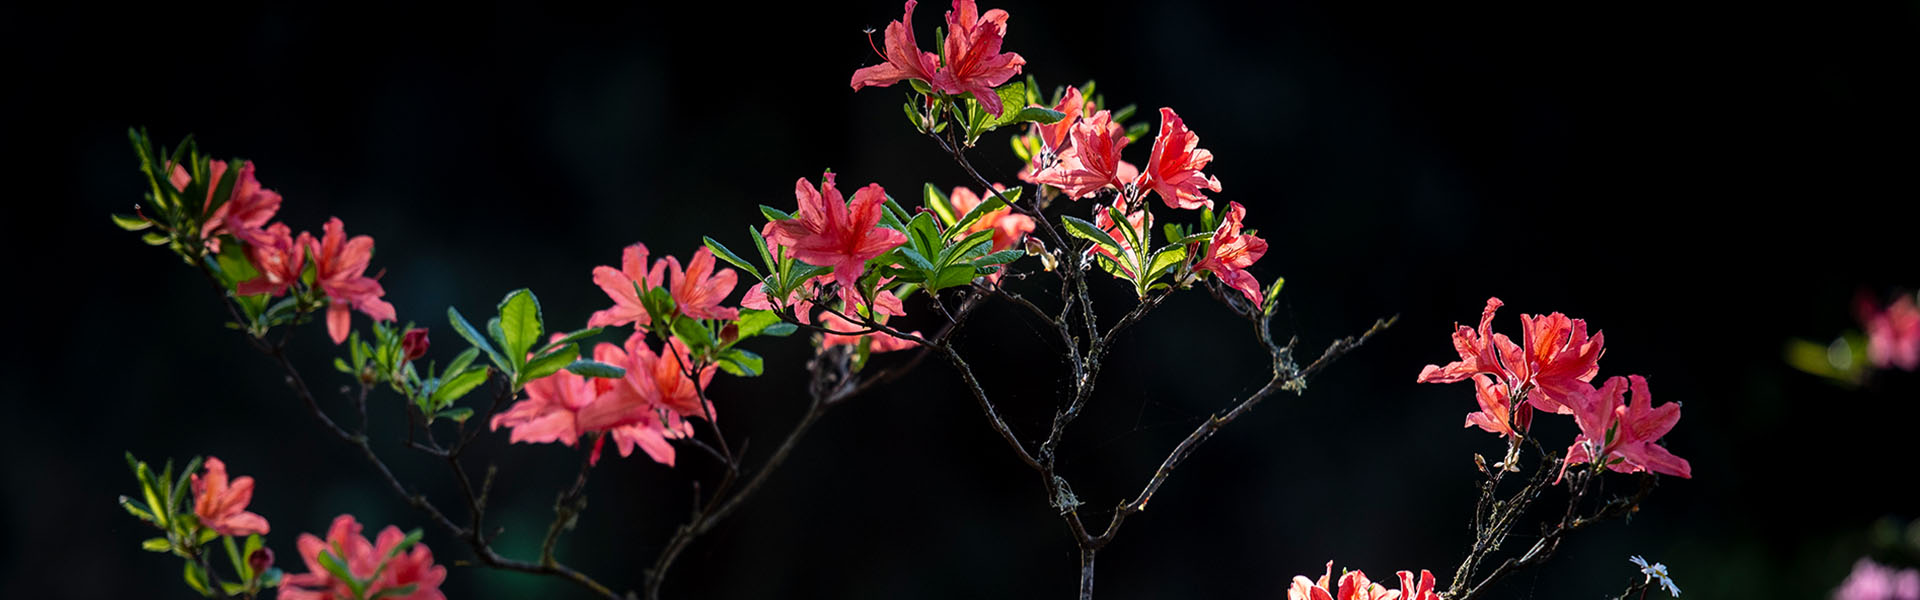 Pink rhododendron flowers against a black background.